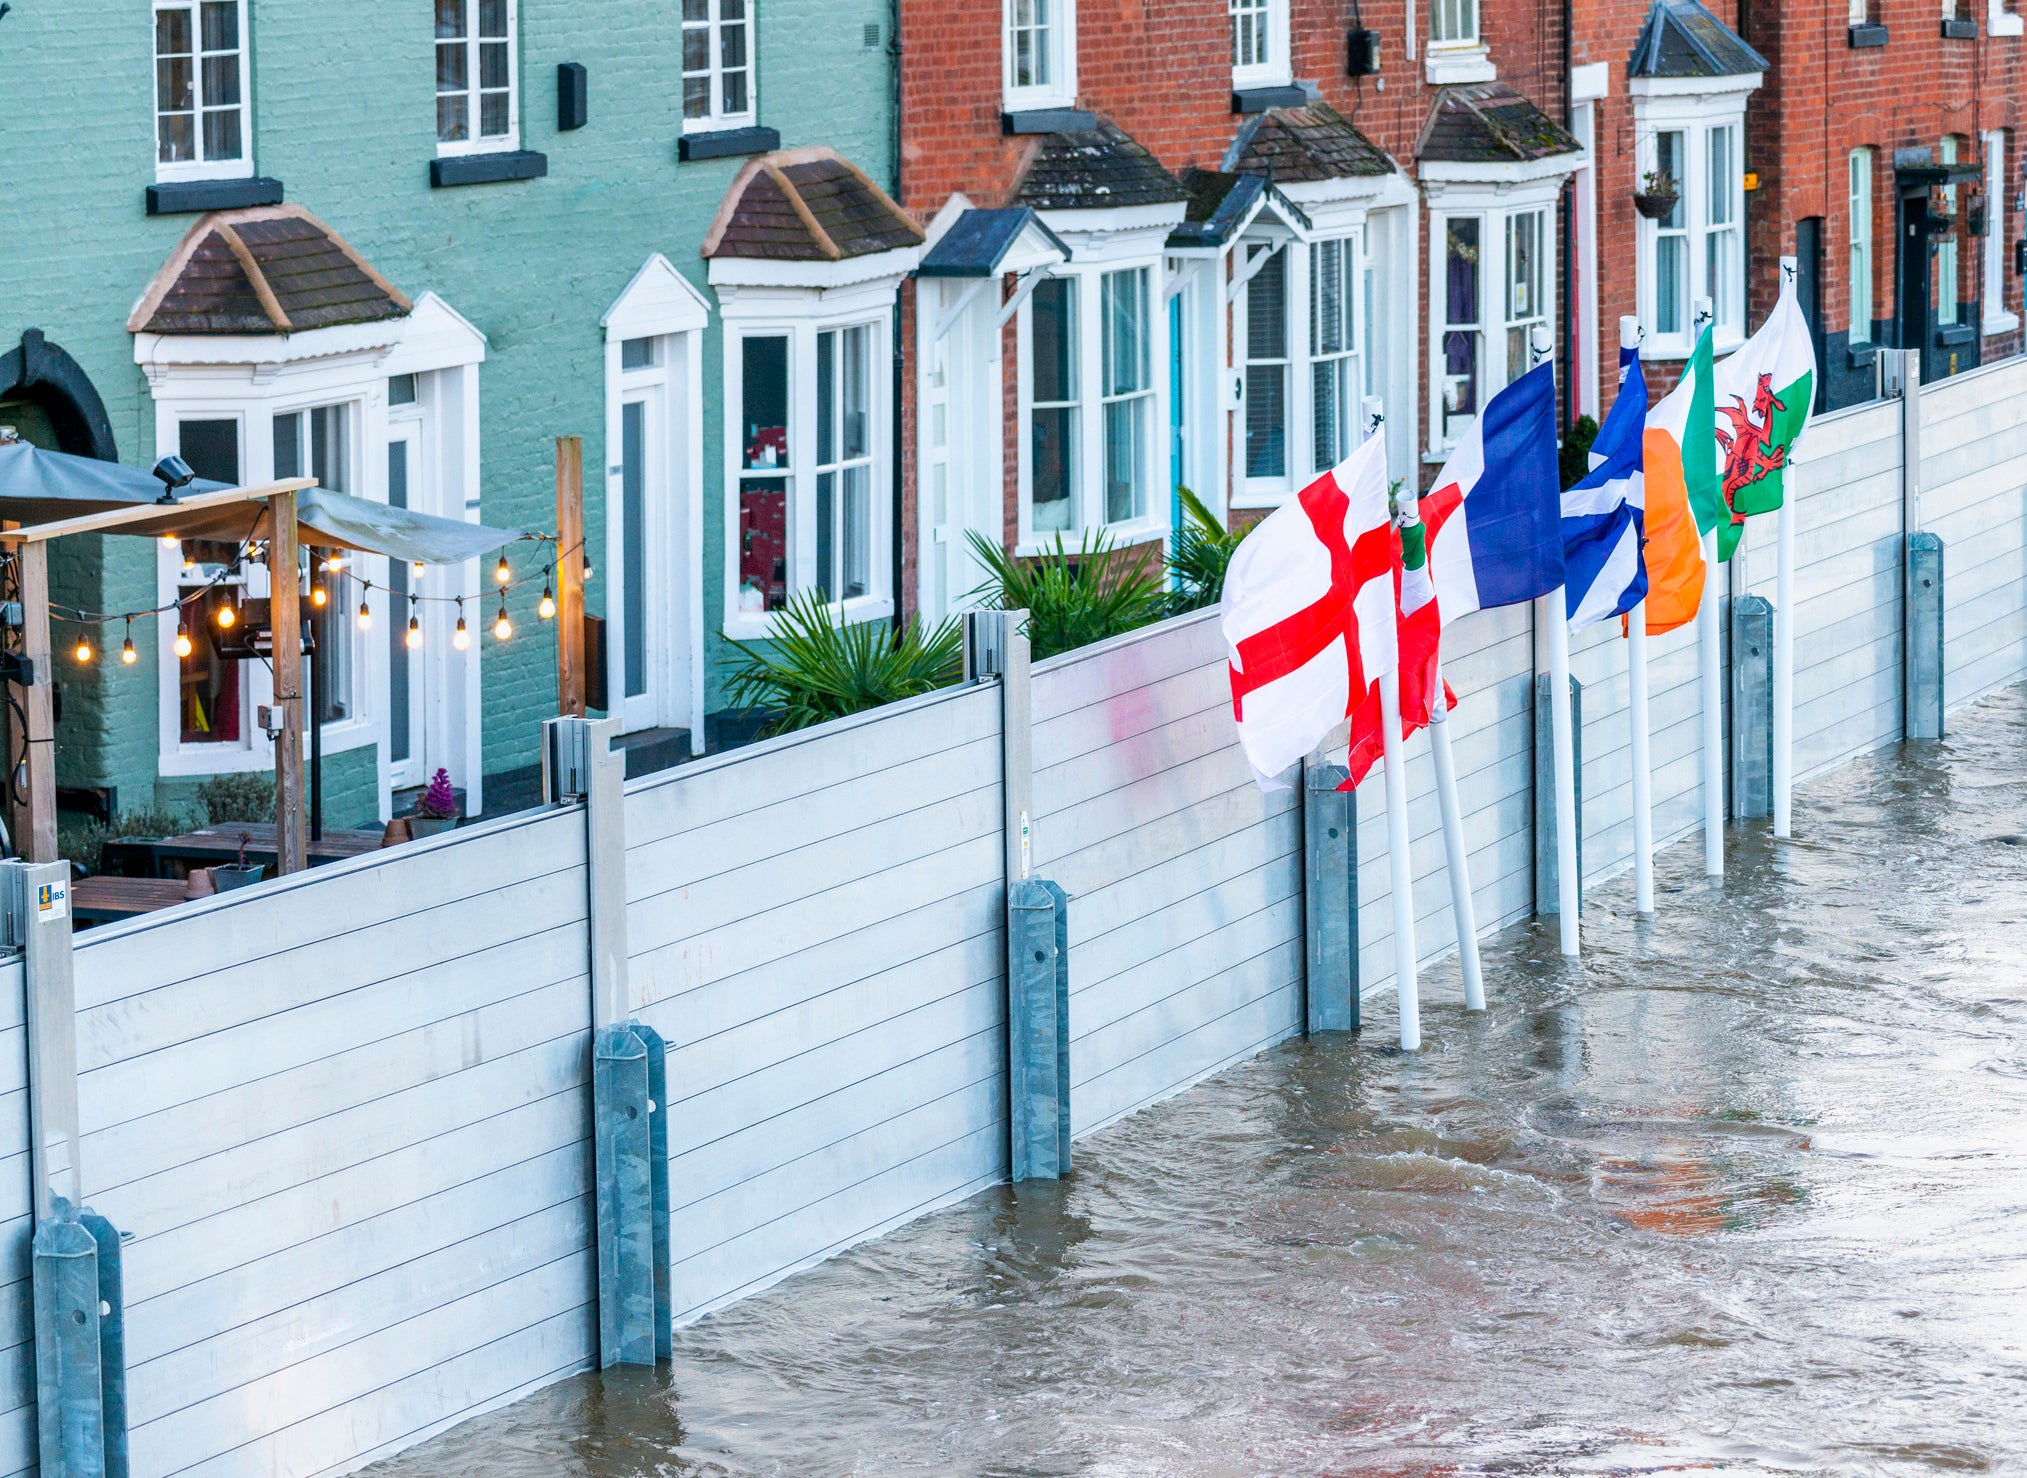 Emergency flood barriers protect homes in Bewdley Bridge, Worcestershire, earlier this year following torrential rain